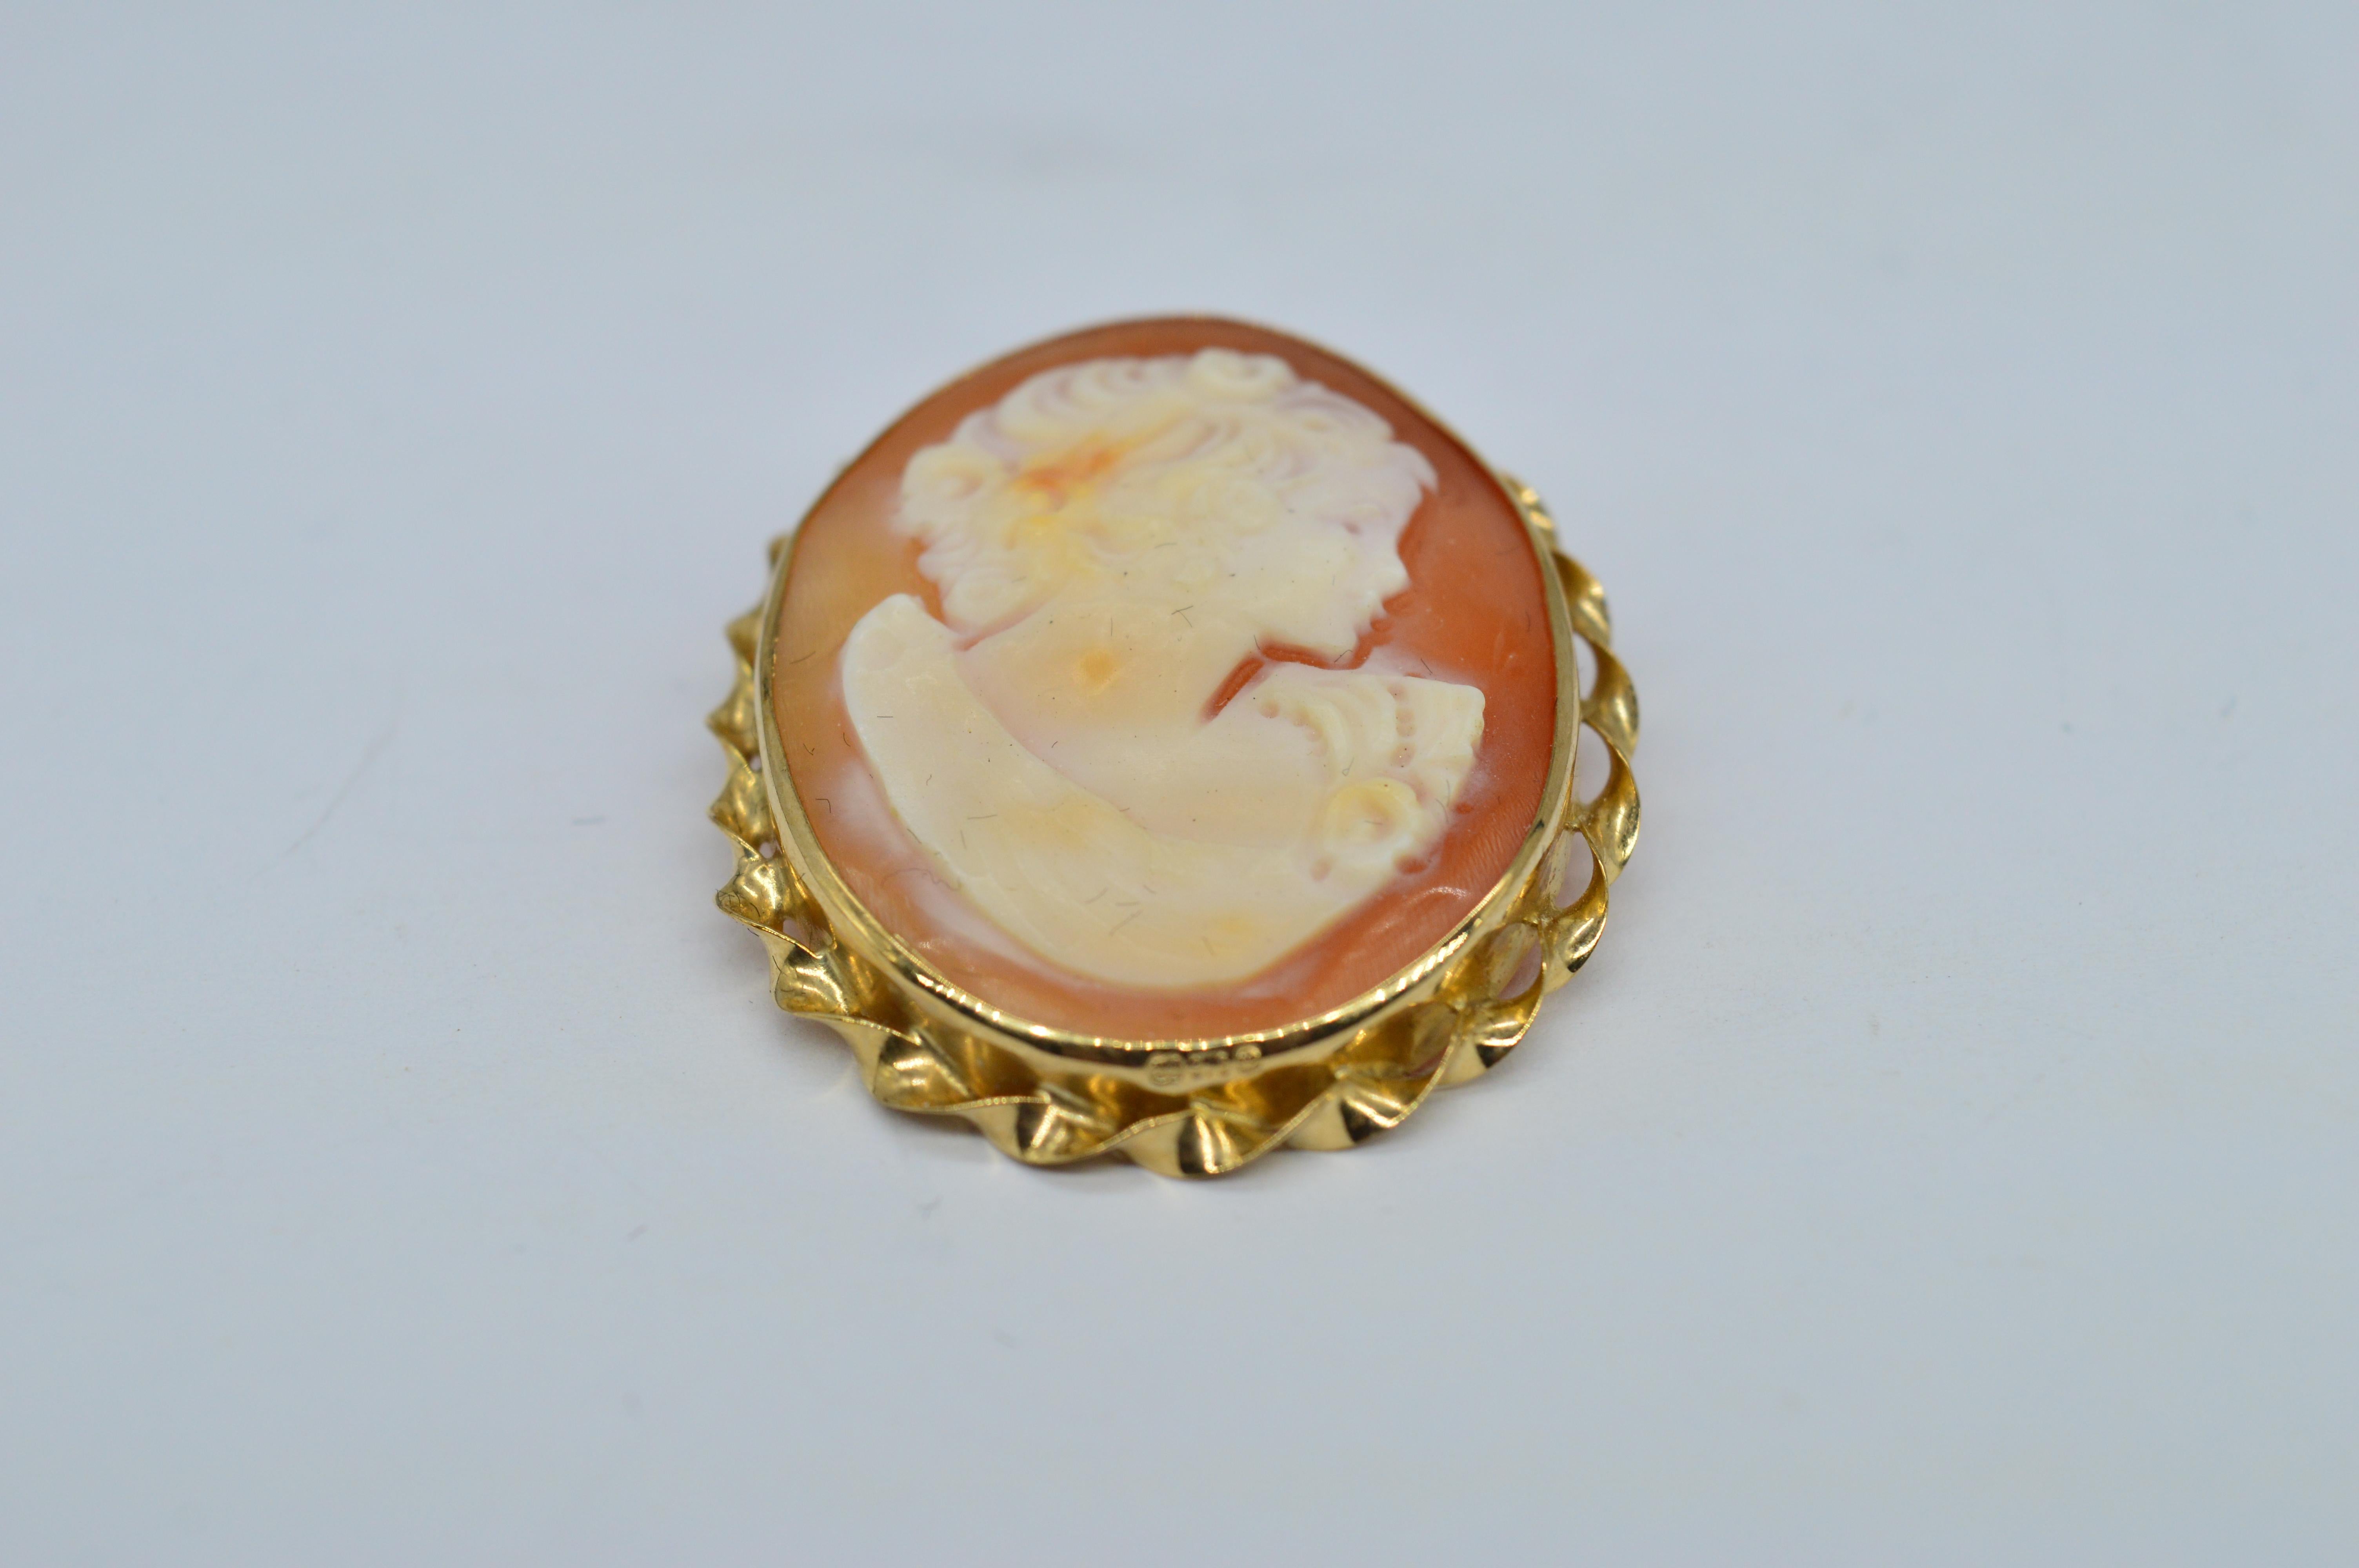 A vintage 9ct gold brooch inset with a shell cameo

The cameo is reminiscent of a Victorian lady

We have sold to the set of Hit shows like Peaky Blinders and Outlander as well as to Buckingham Palace so our items are truly fit for royalty.

Through